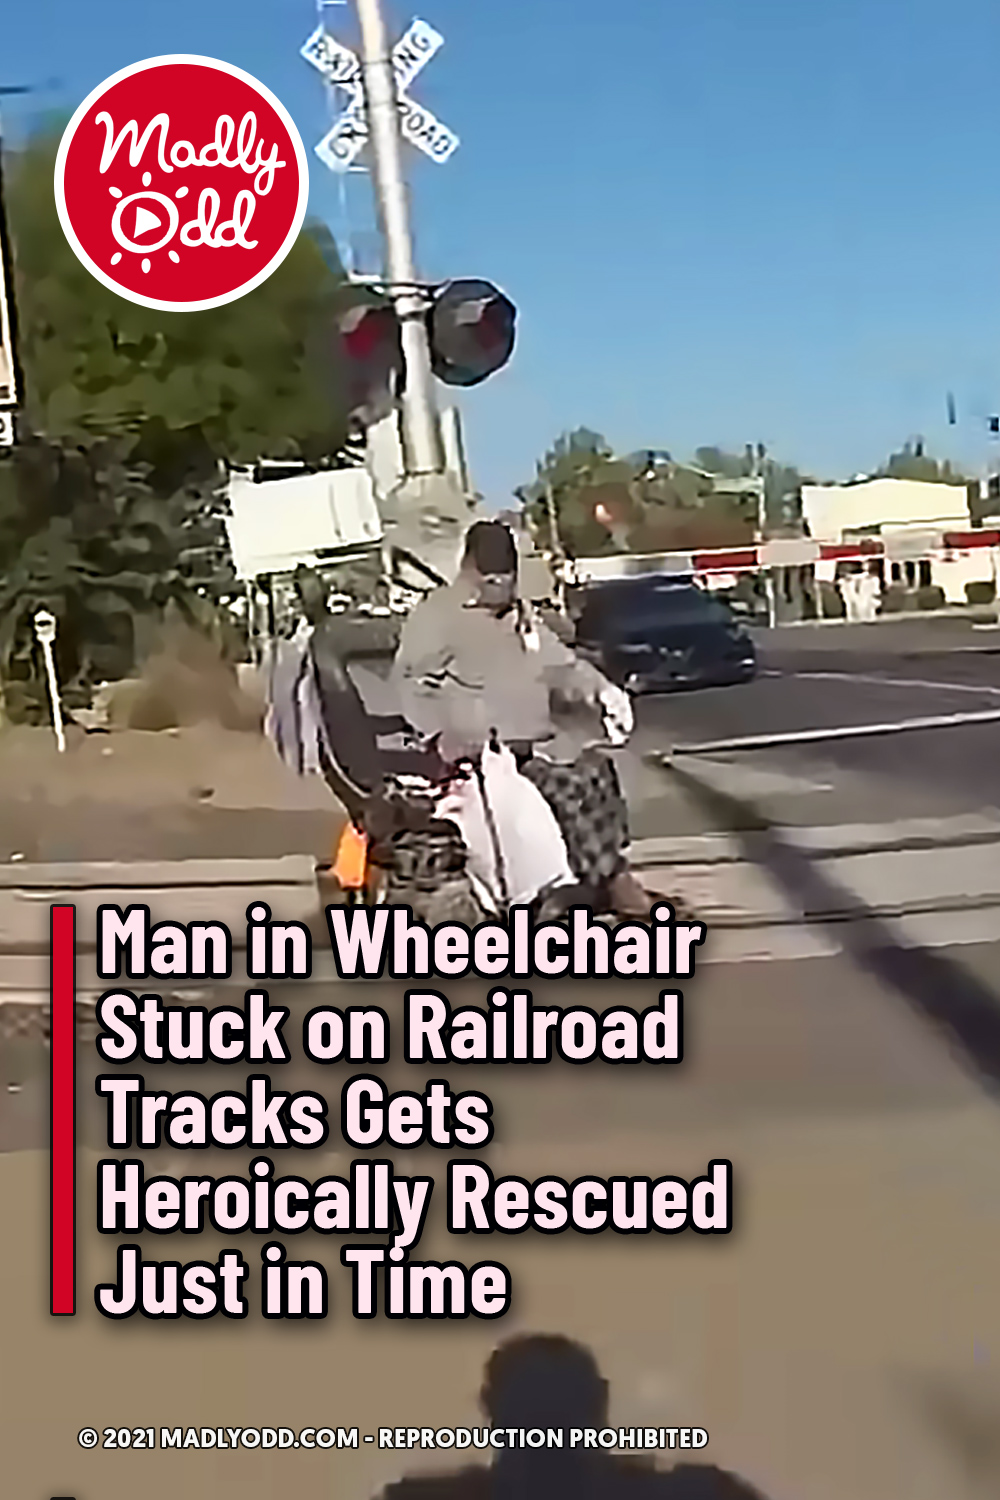 Man in Wheelchair Stuck on Railroad Tracks Gets Heroically Rescued Just in Time